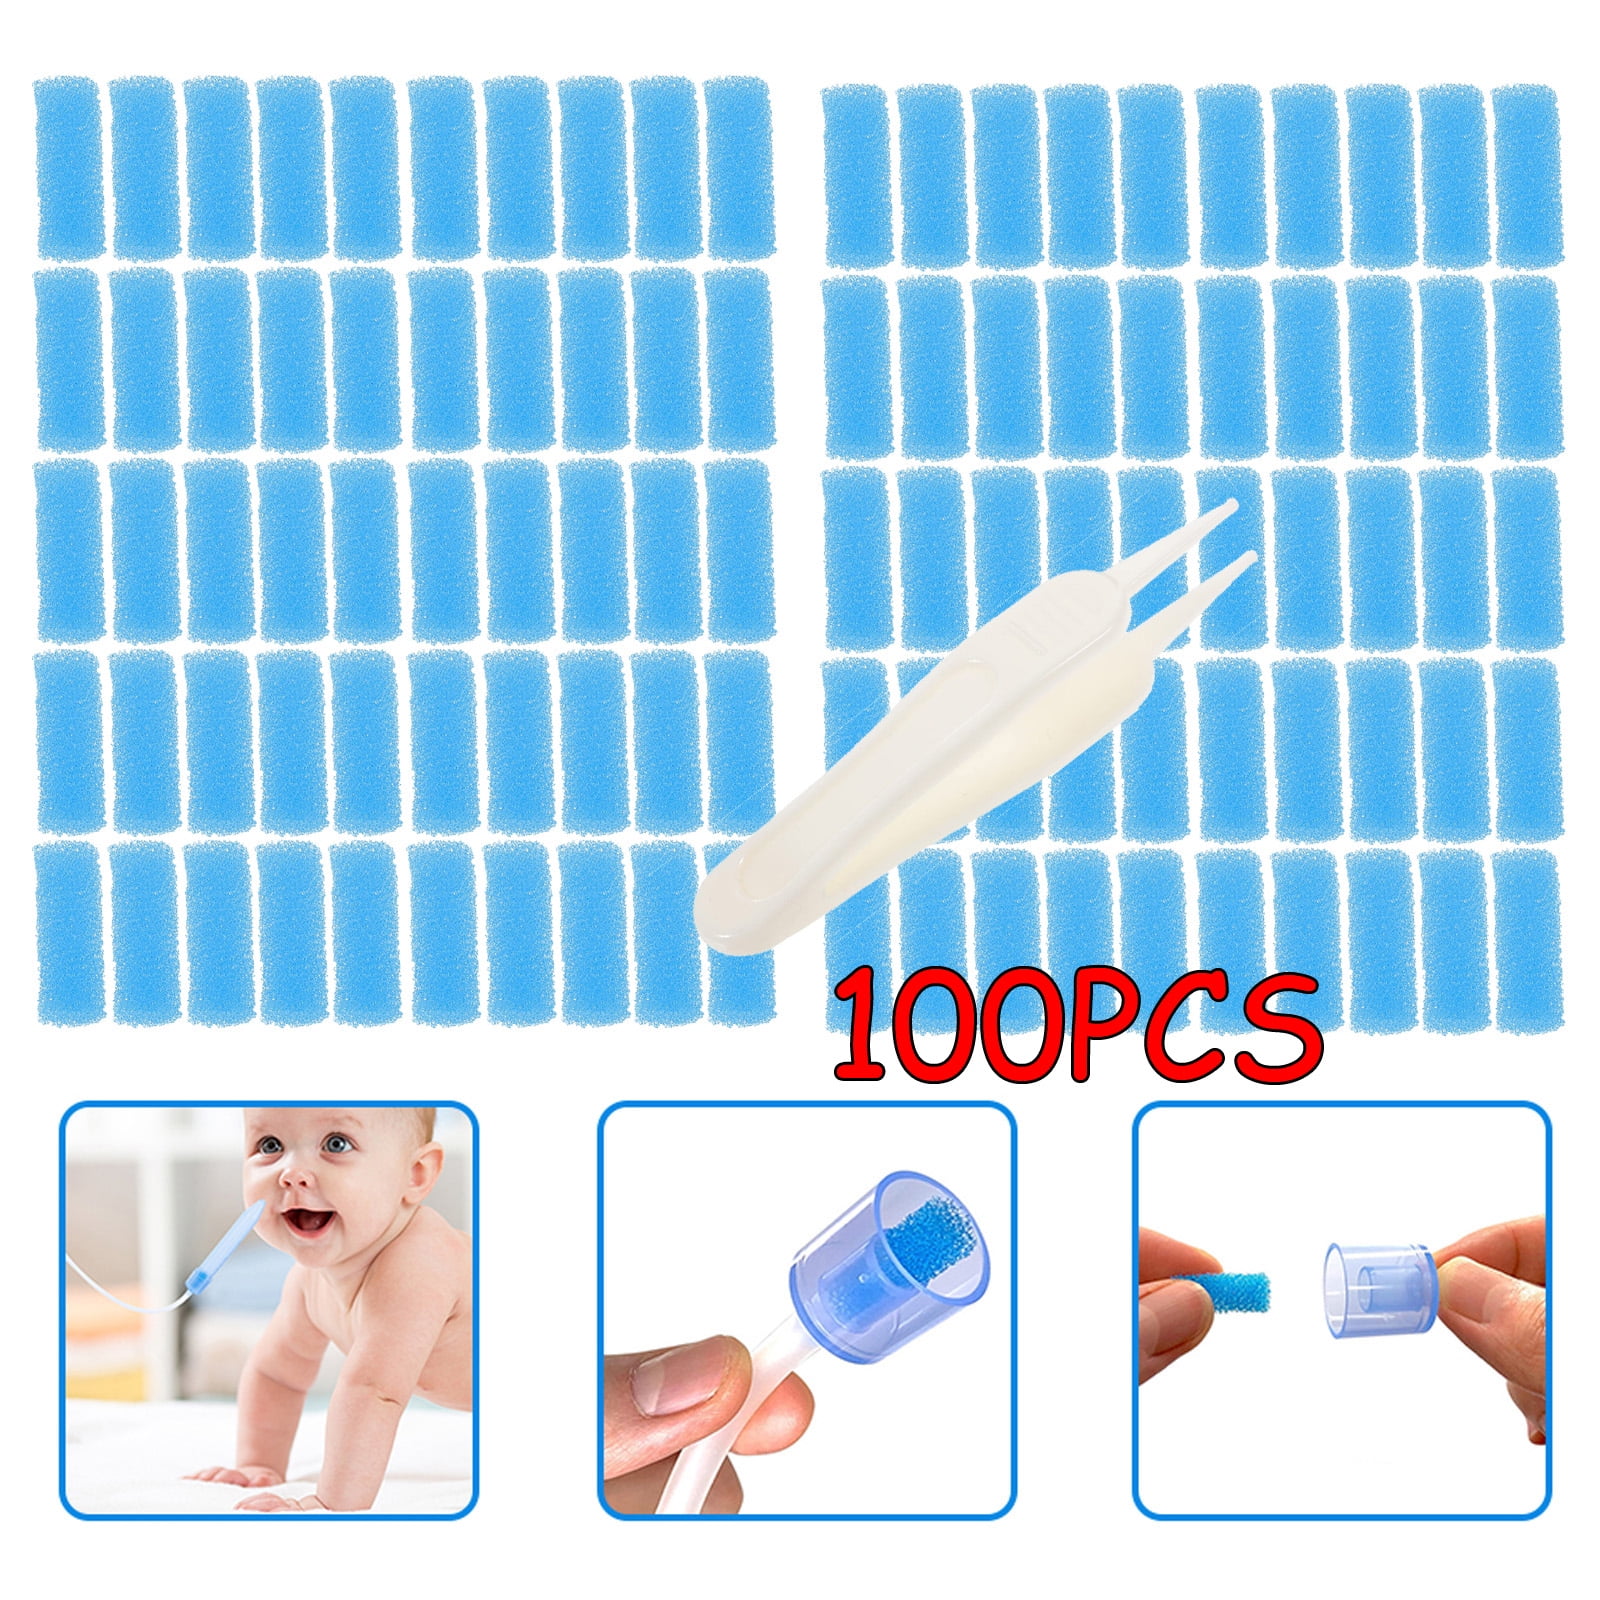  100-Pack of Premium Nasal Aspirator Hygiene Filters,  Replacement for NoseFrida Nasal Aspirator Filters, BPA, Phthalate &  Latex-Free with Nose Cleaning Tweezer : Baby